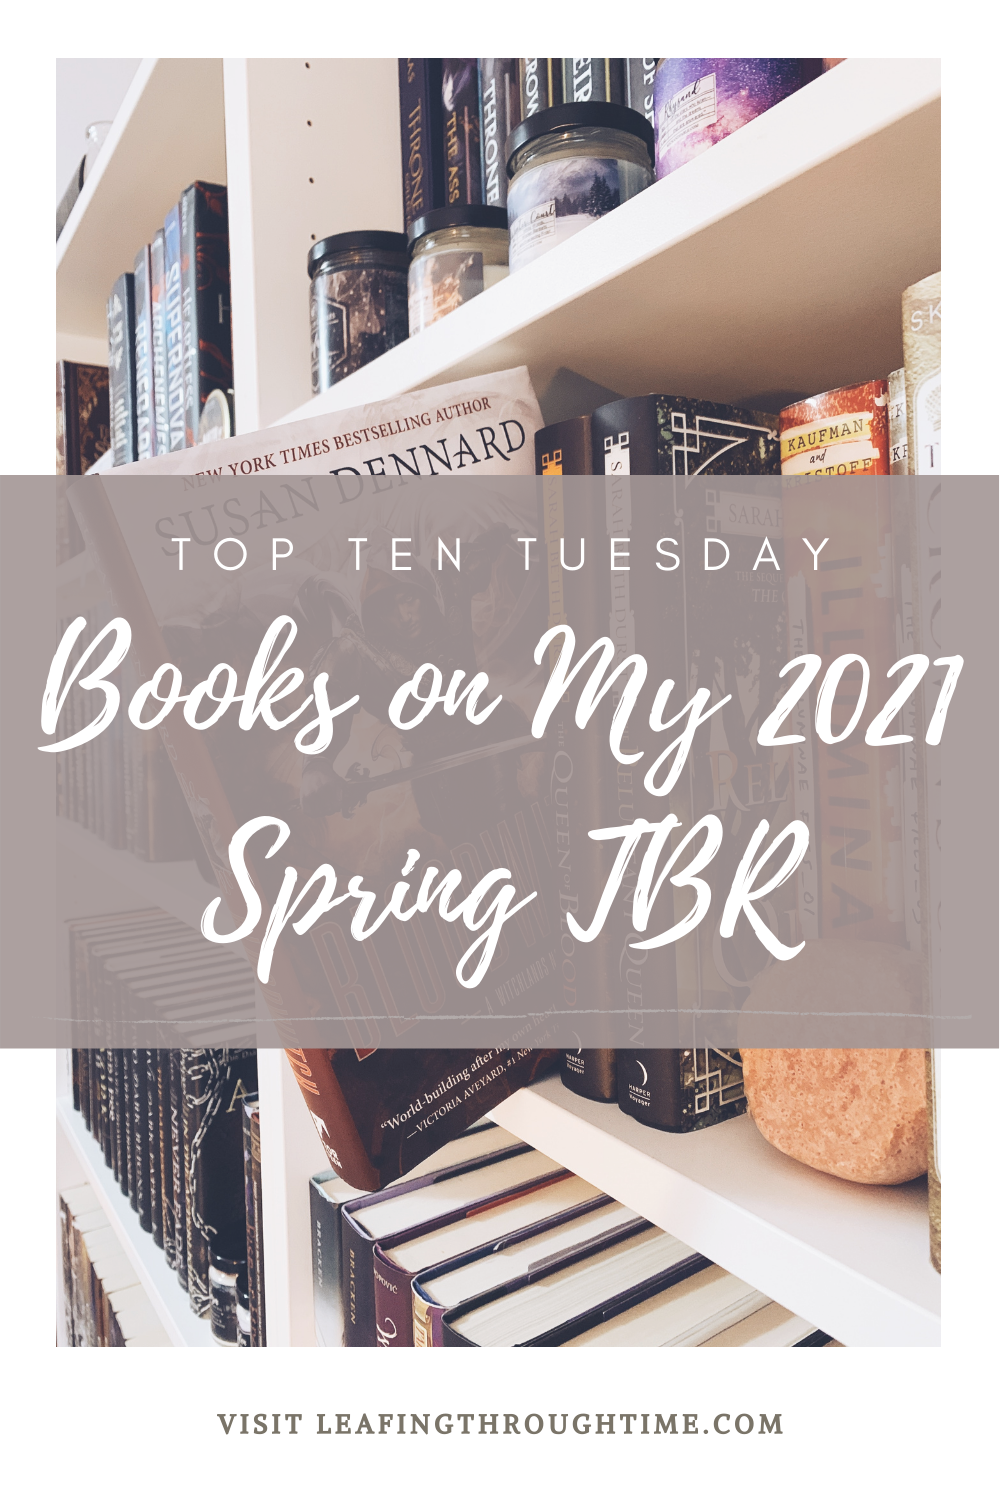 Top Ten Tuesday – Books On My 2021 Spring TBR